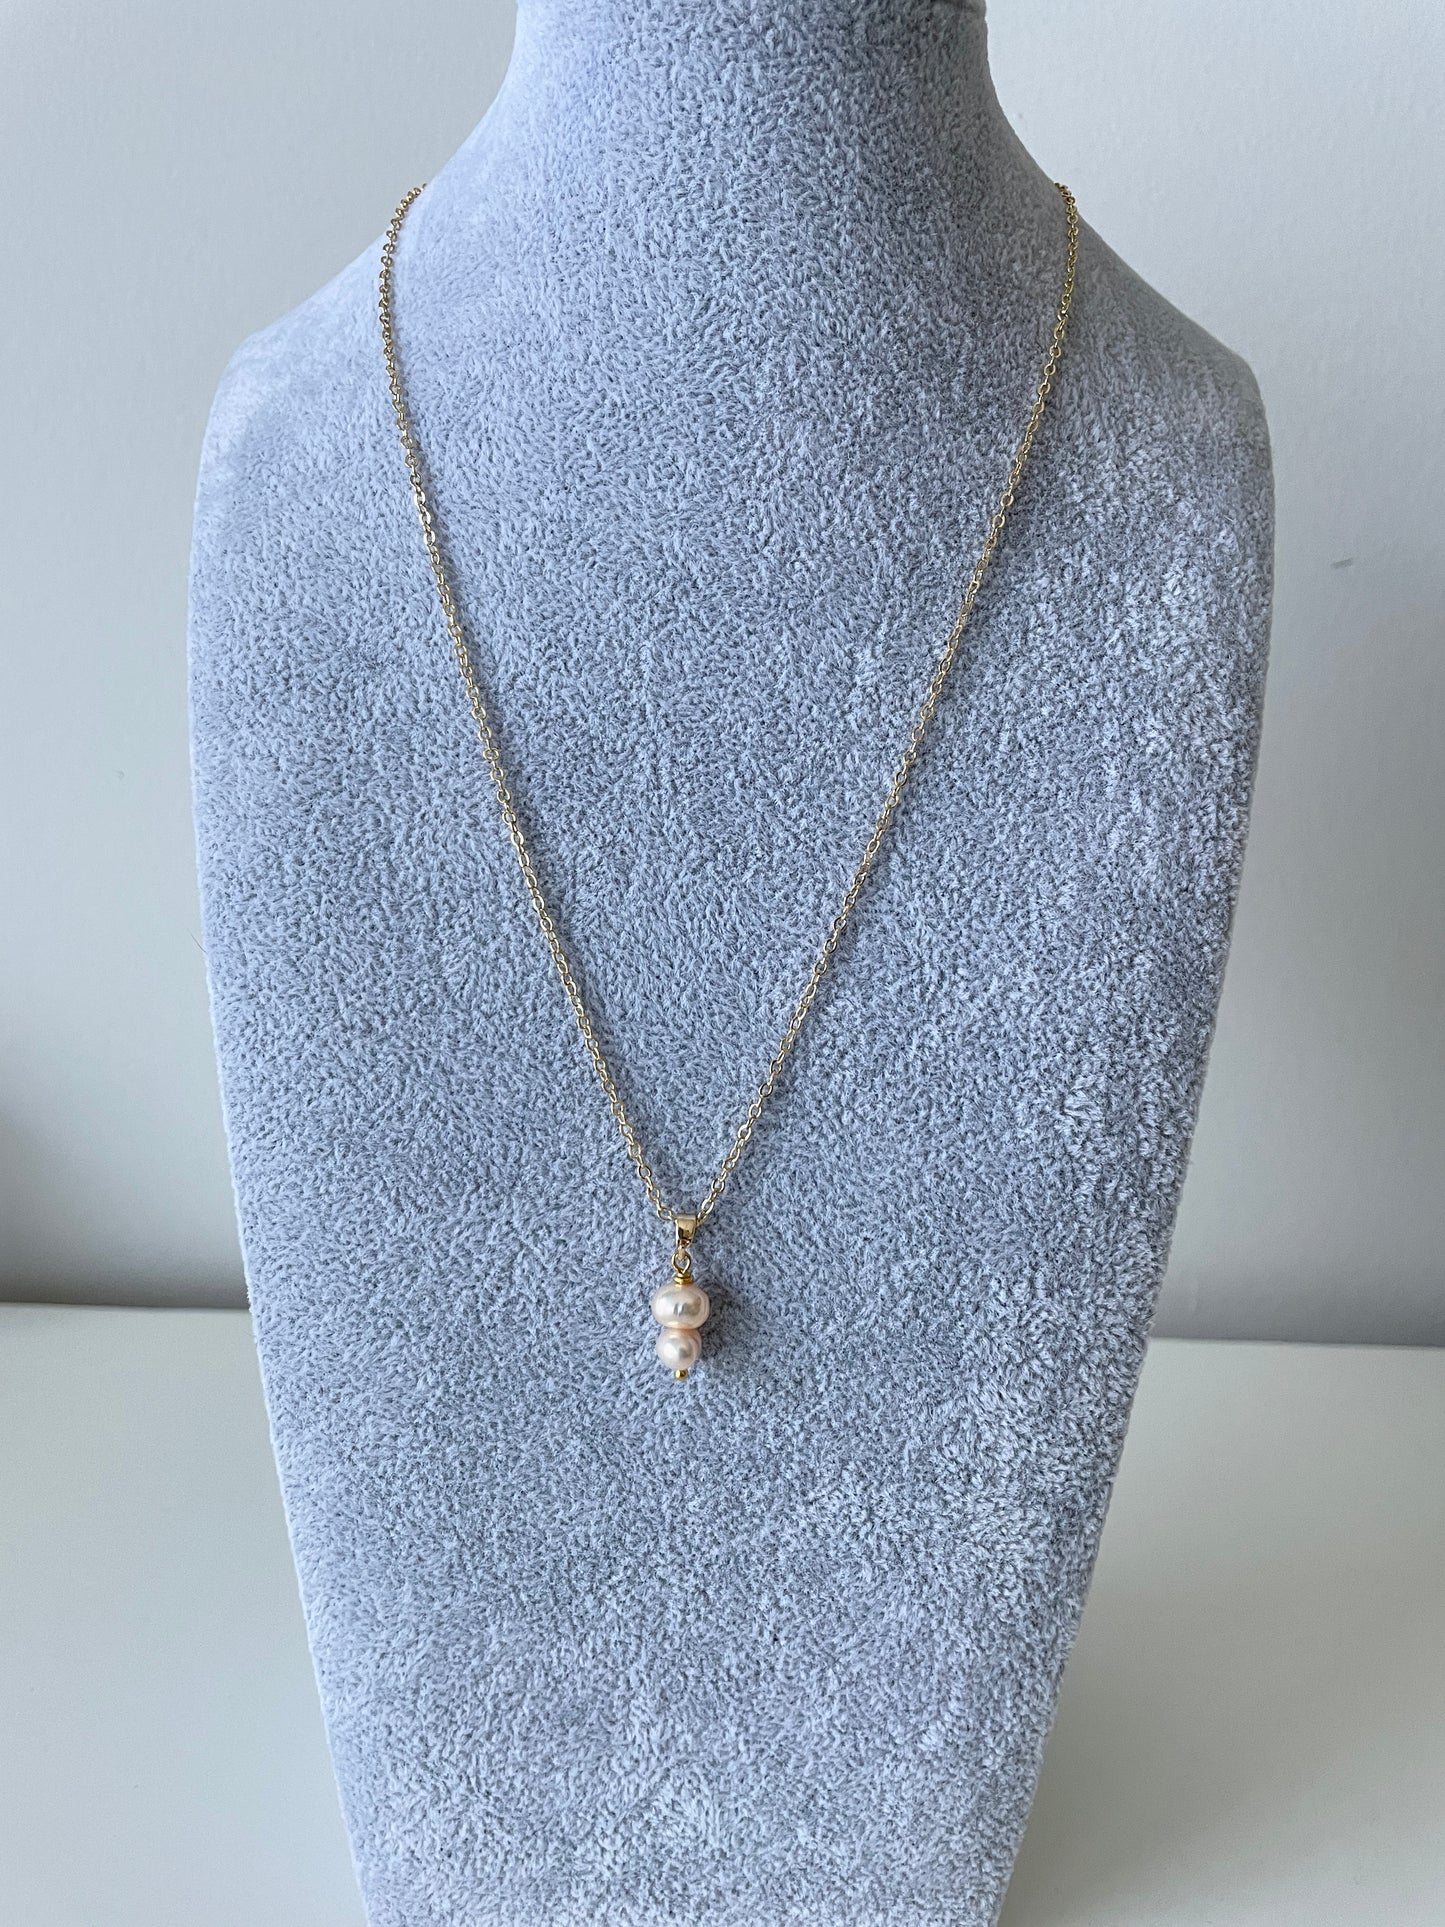 Soft Pink& Gold Fresh Pearl Pendant Necklace